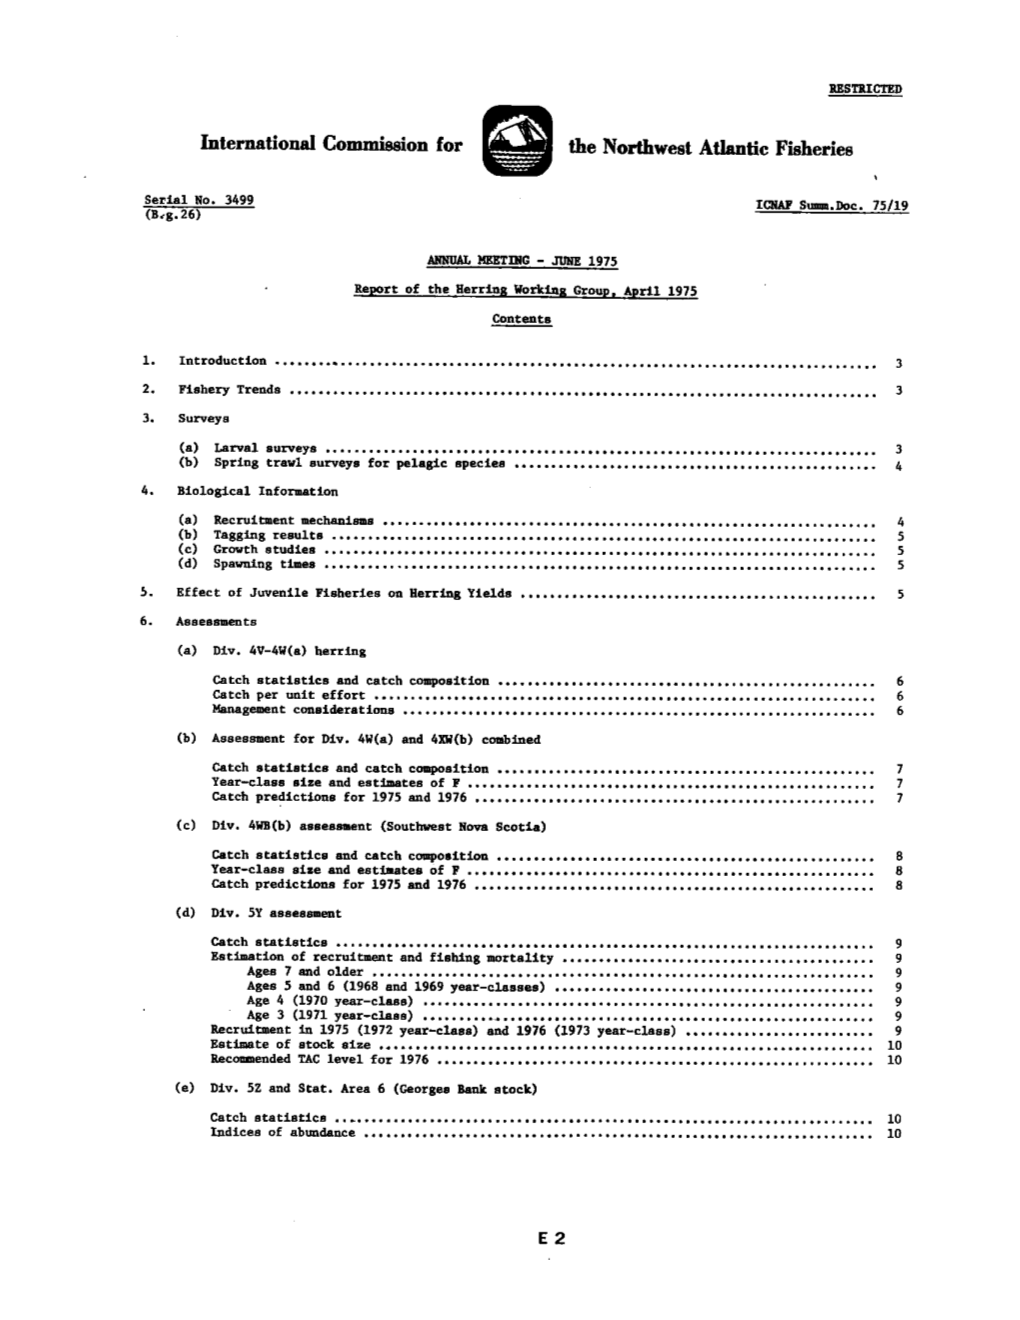 Report of the Herring Working Group, April 1975